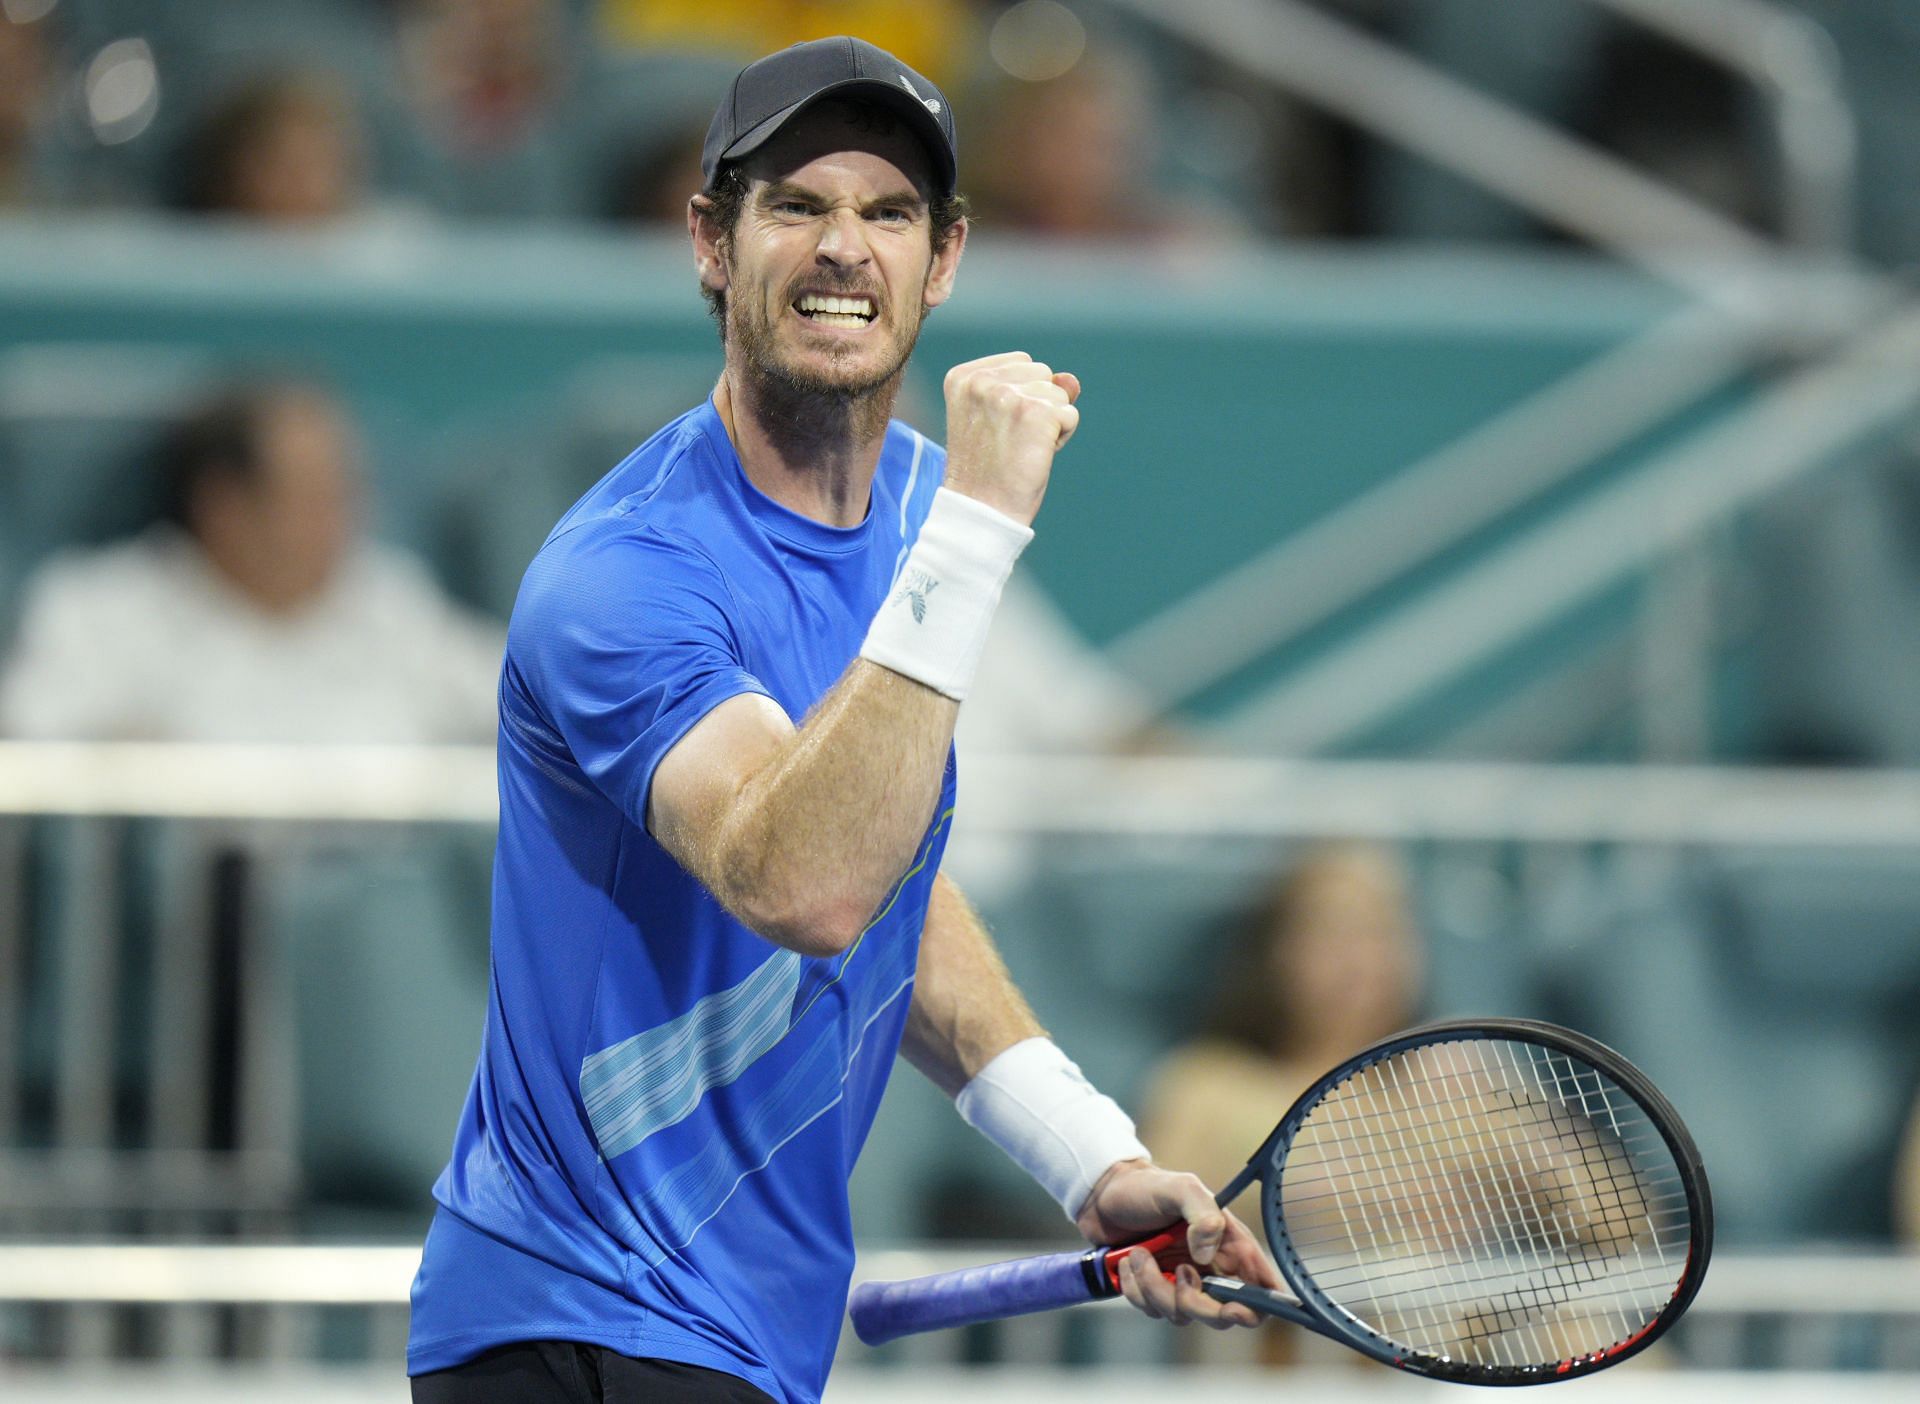 Andy Murray won his first-round match against Federico Delbonis